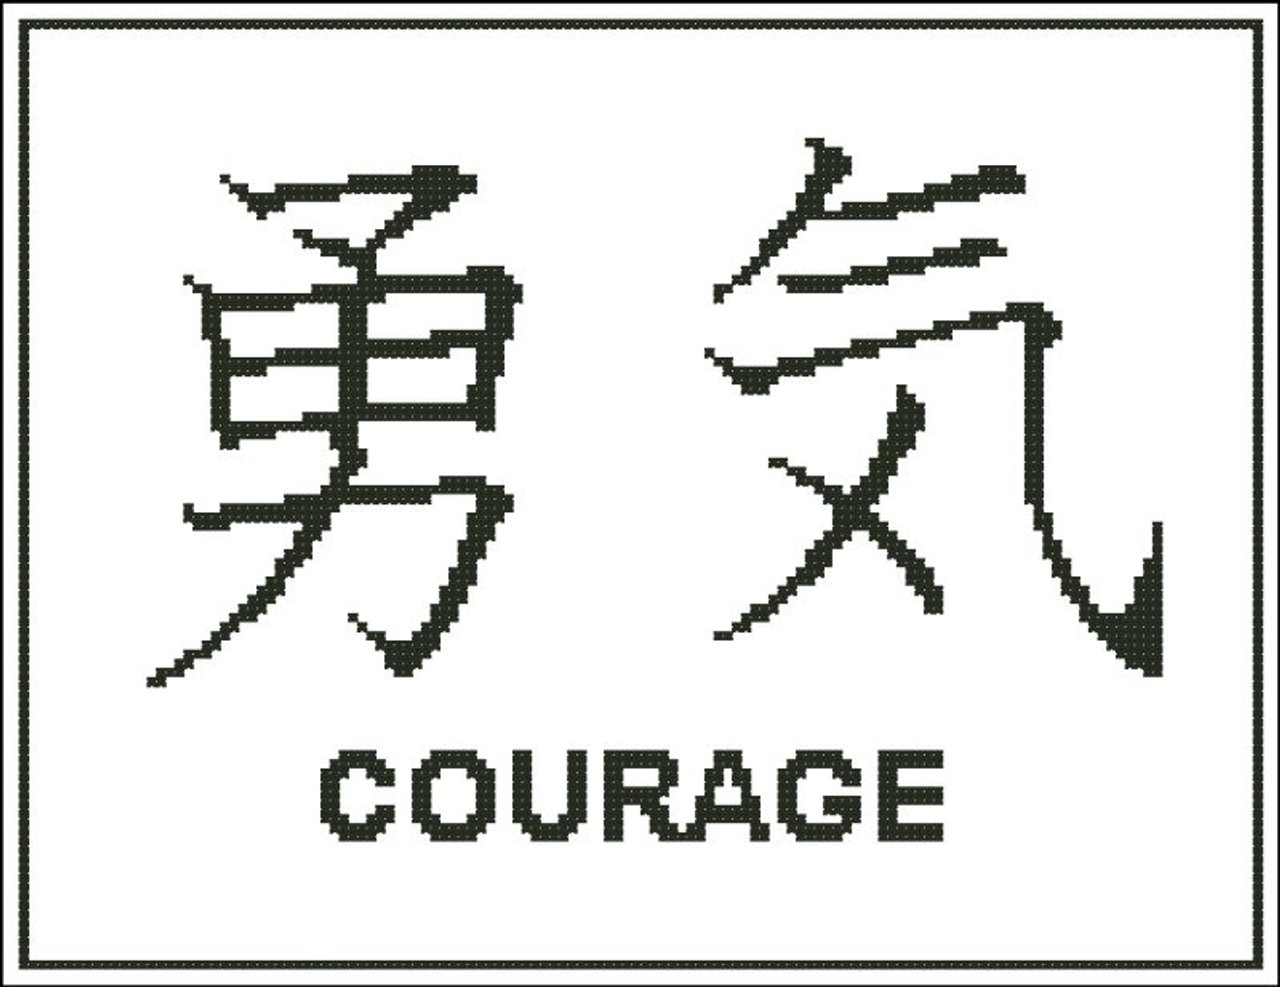 japanese symbol for strength and courage